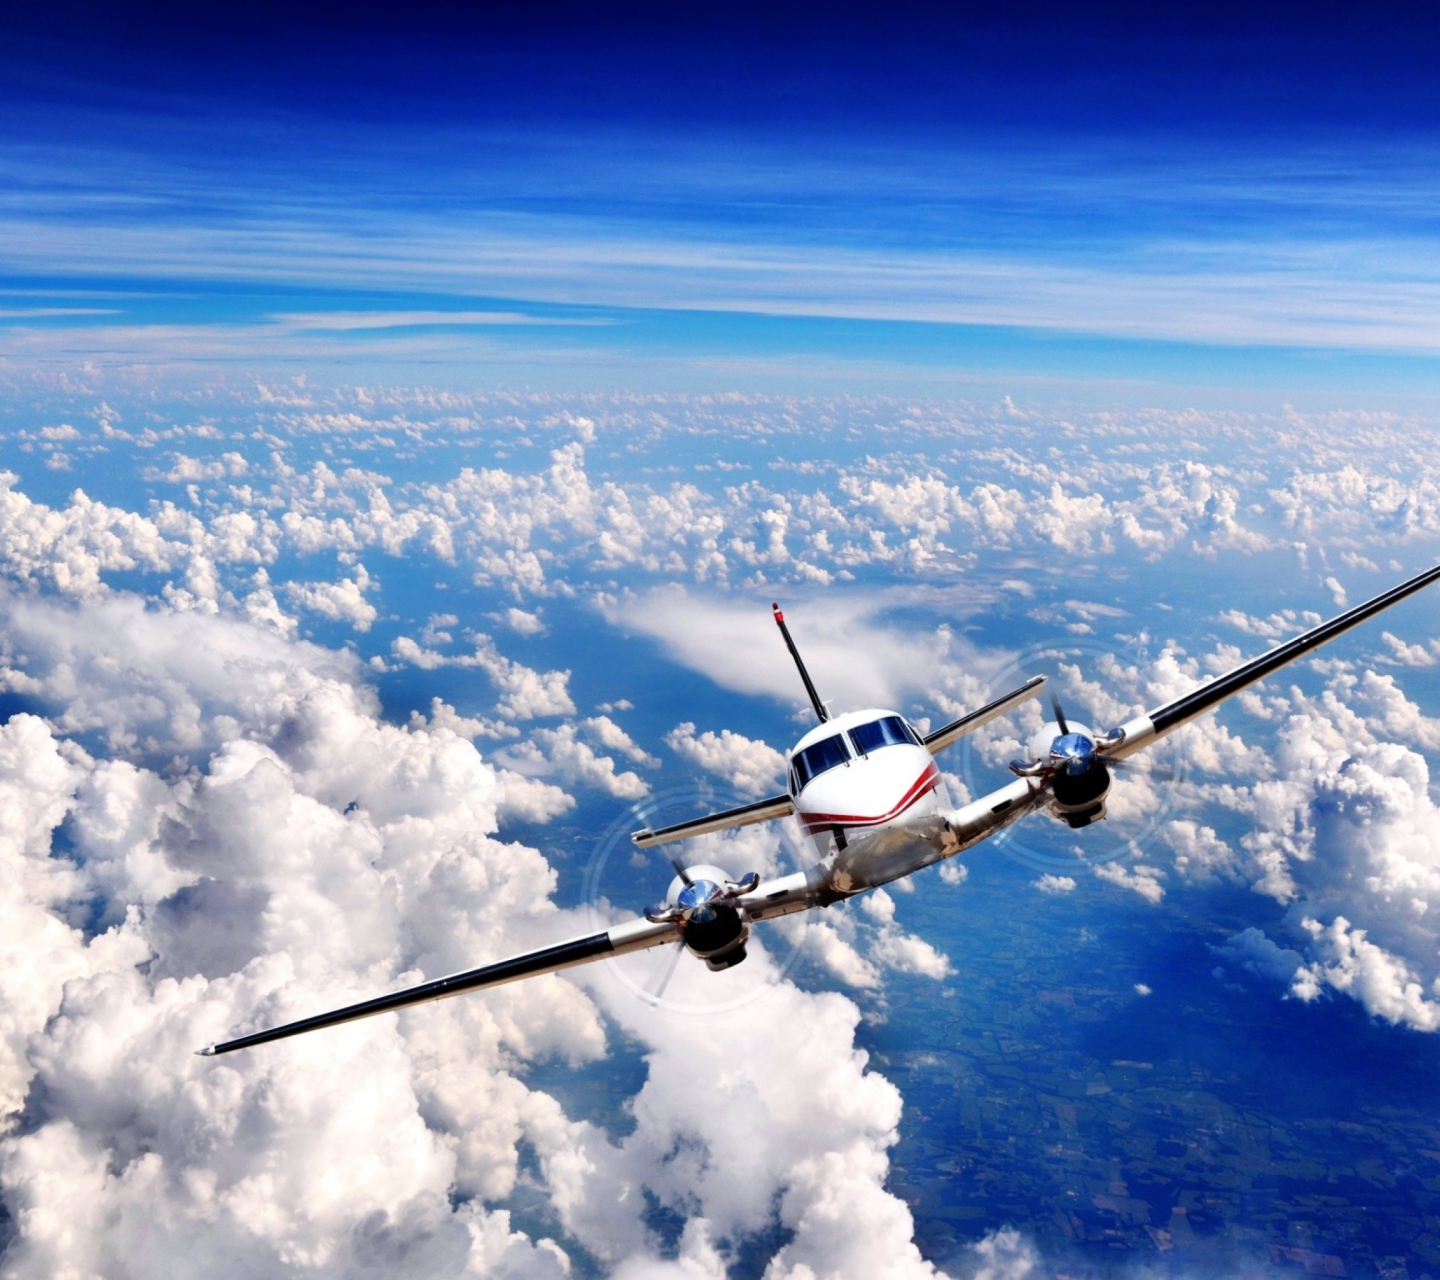 Plane Over The Clouds wallpaper 1440x1280